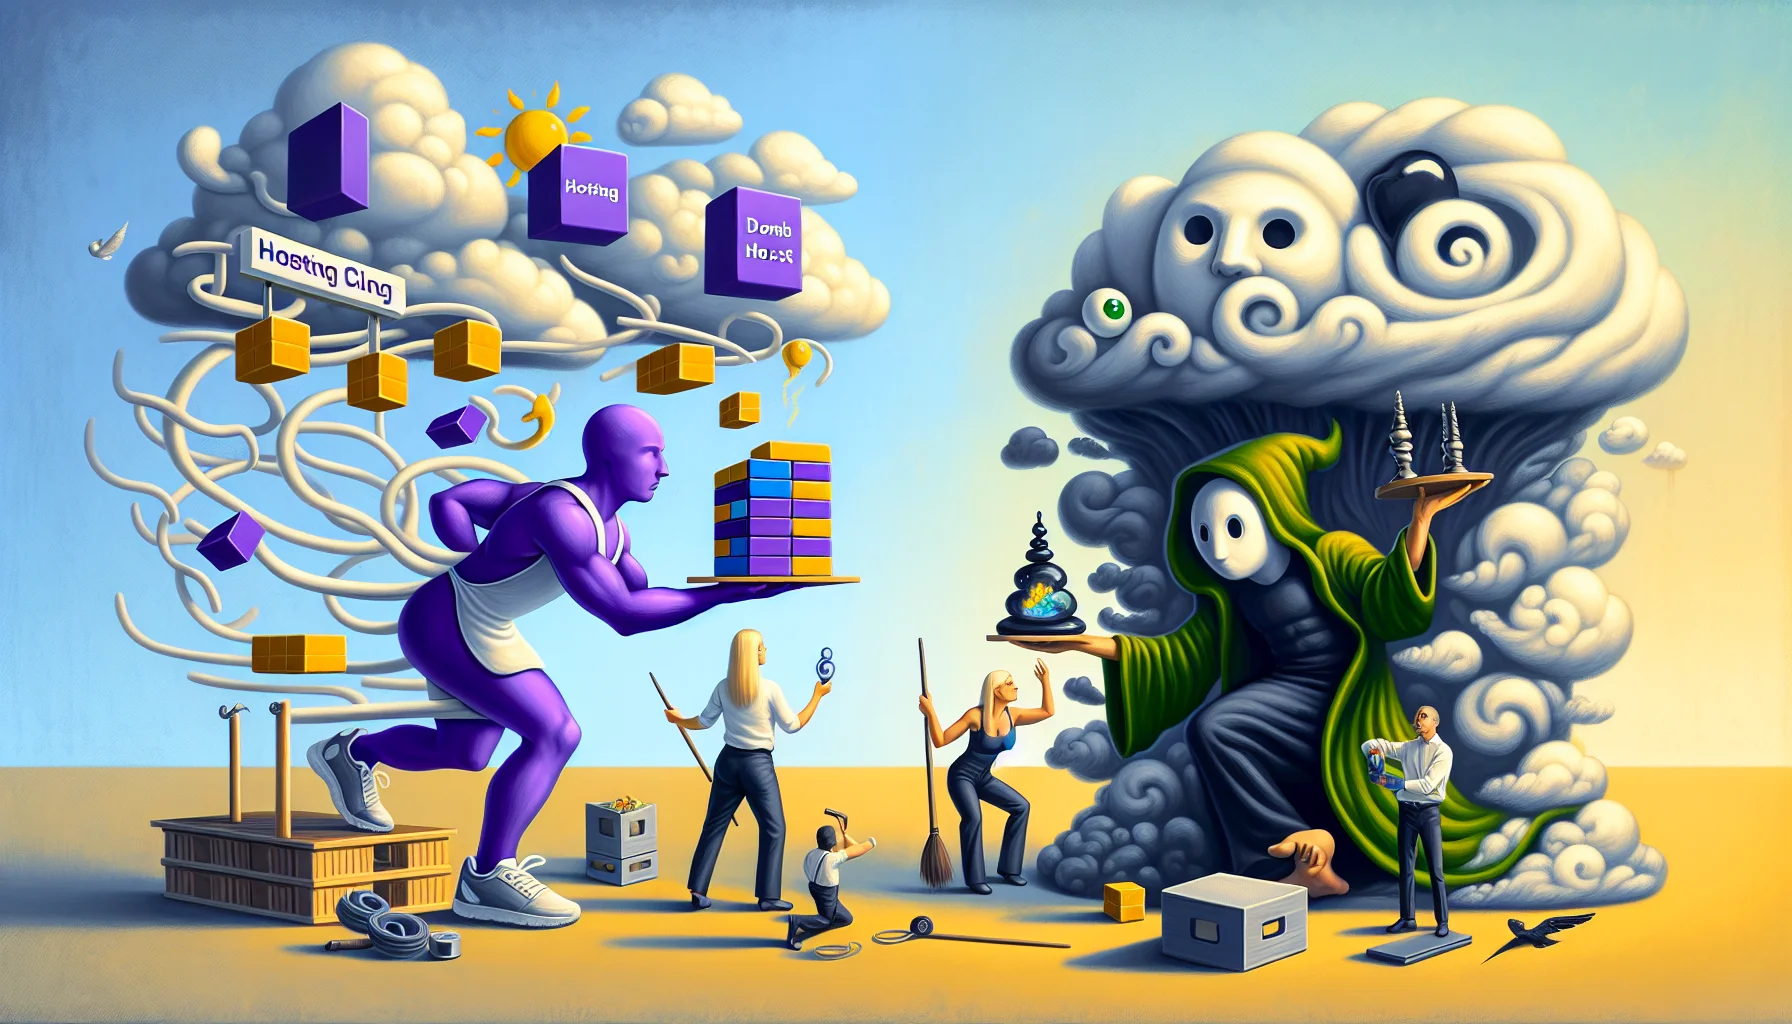 Create a whimsical scene representing the friendly competition between two abstract web hosting entities. On one side, visualize a figure embodied as a nimble athlete garbed in purple and white (a nod to Hostinger's branding). On the other side, depict another figure as a dreaming sorcerer donned in green and black (representing DreamHost). The athlete is speedily assembling a complex structure of blocks, signifying building a website, while the sorcerer conjures clouds to incarnate a digital ether, signifying web hosting. Add humorous elements such as their unusual tools, pet mascots, or humorous expressions to keep things enticing and funny. Balance the scene to convey no company is superior over the other.